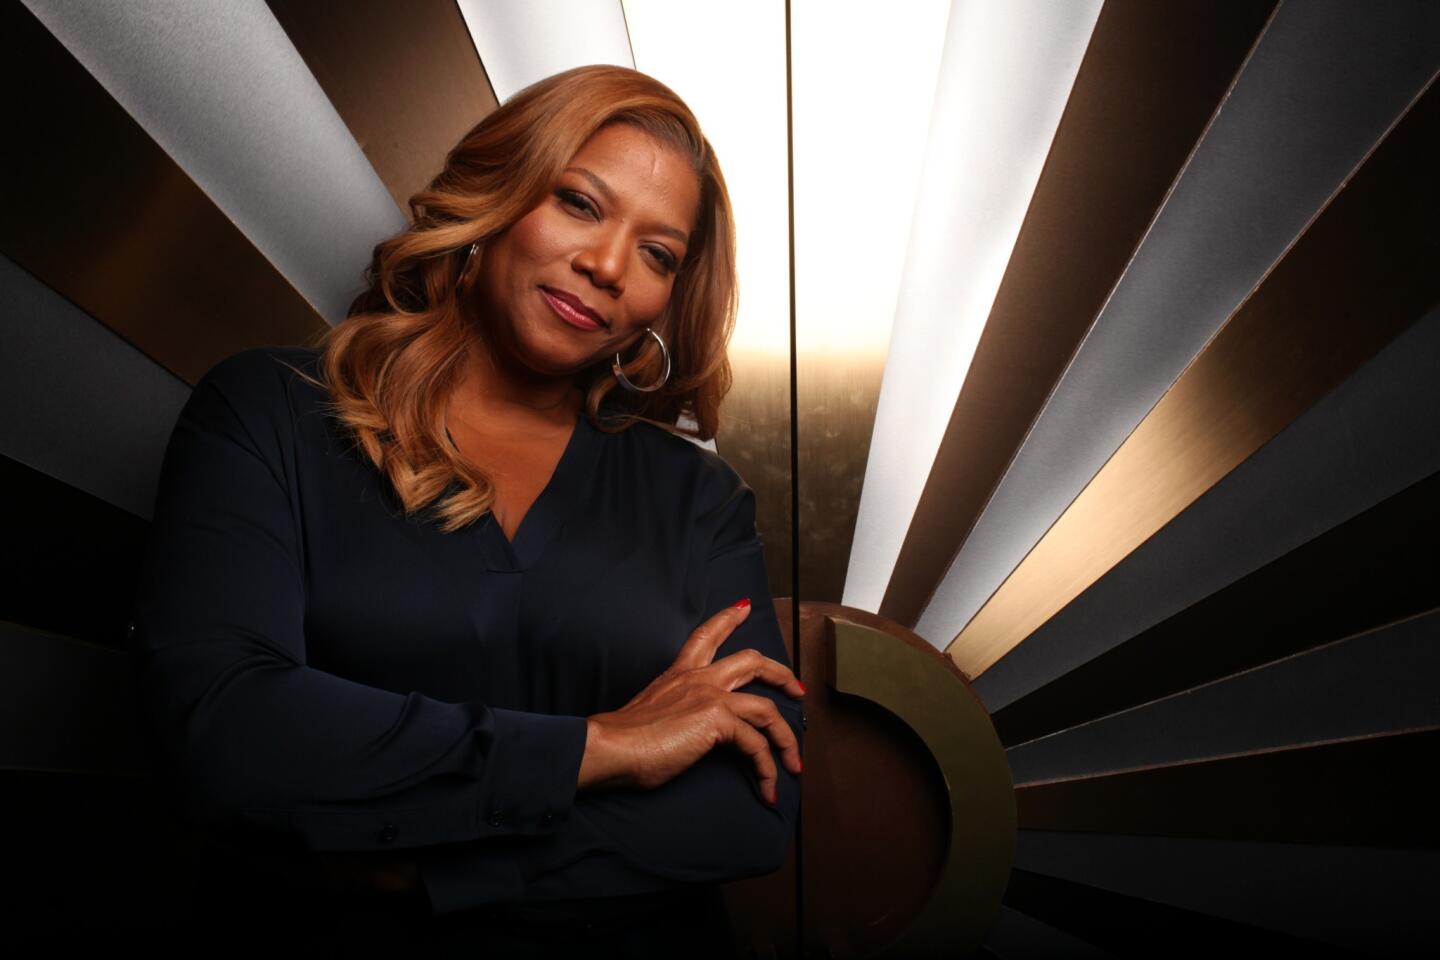 Queen Latifah, from "The Queen Latifah Show," will host this year's Hollywood Film Awards. "I'm honored to be a part of such a legendary award show," the multi-talented talk show host said.